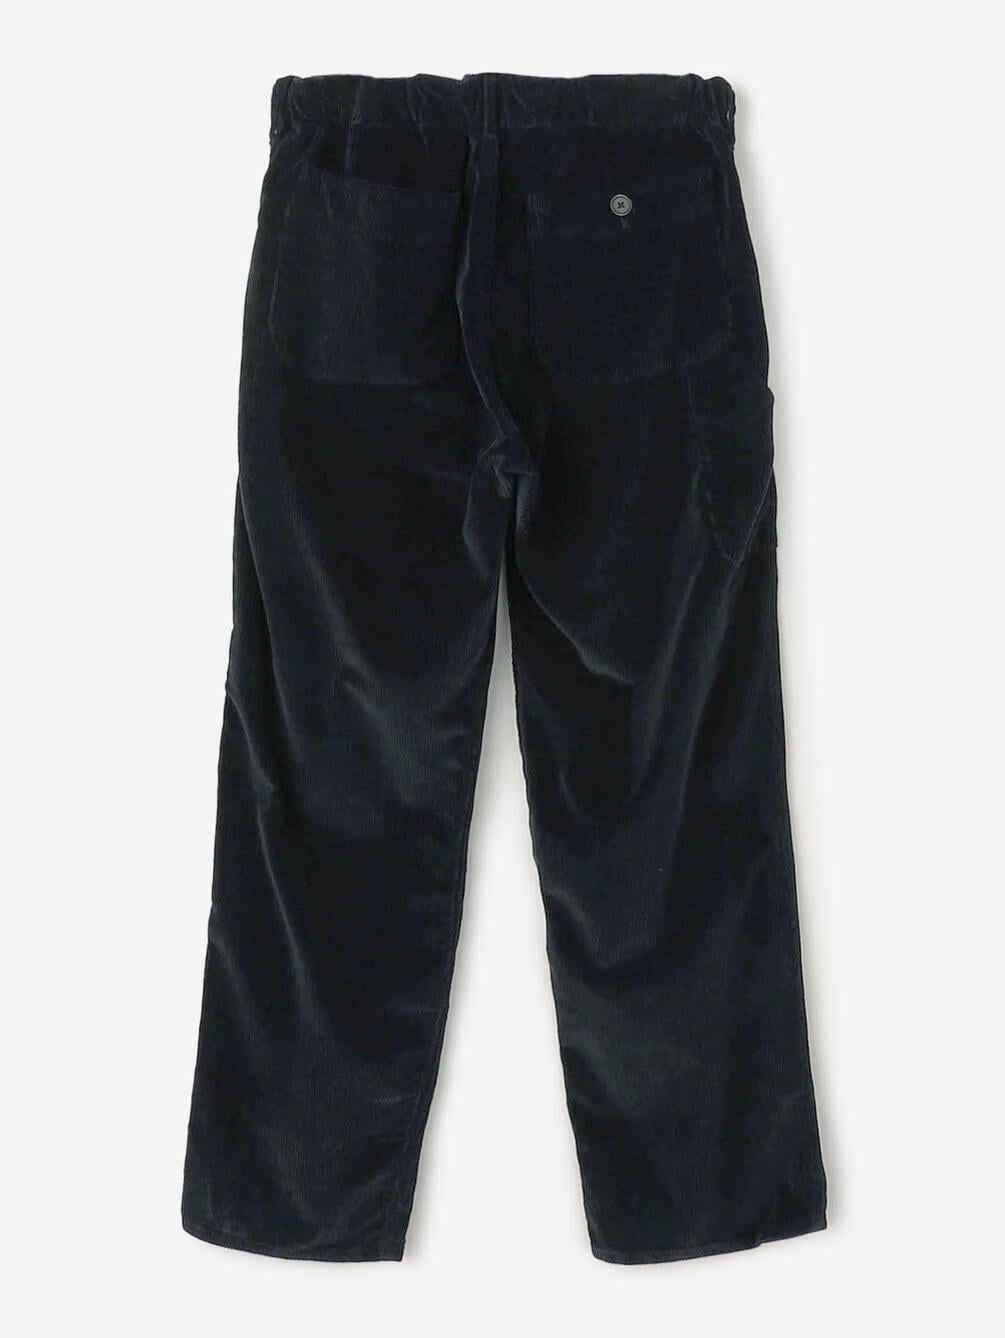 orSlow FRENCH WORK PANTS Corduroy navy